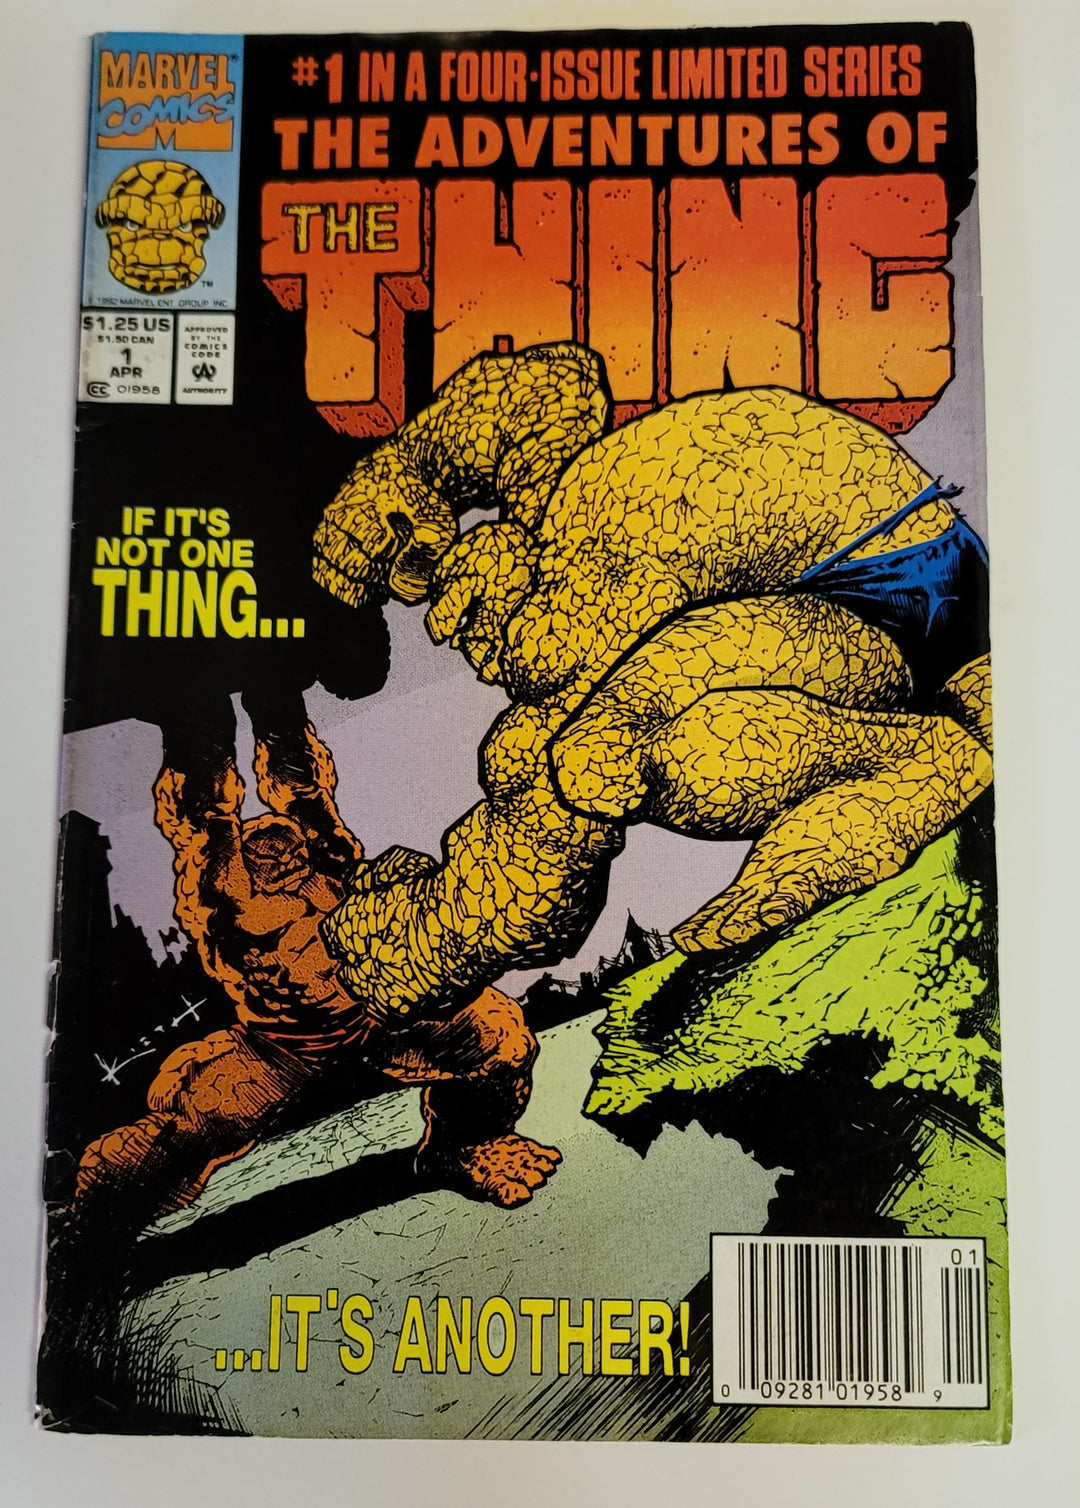 The Adventures of The Thing #1 Issue Marvel Comics